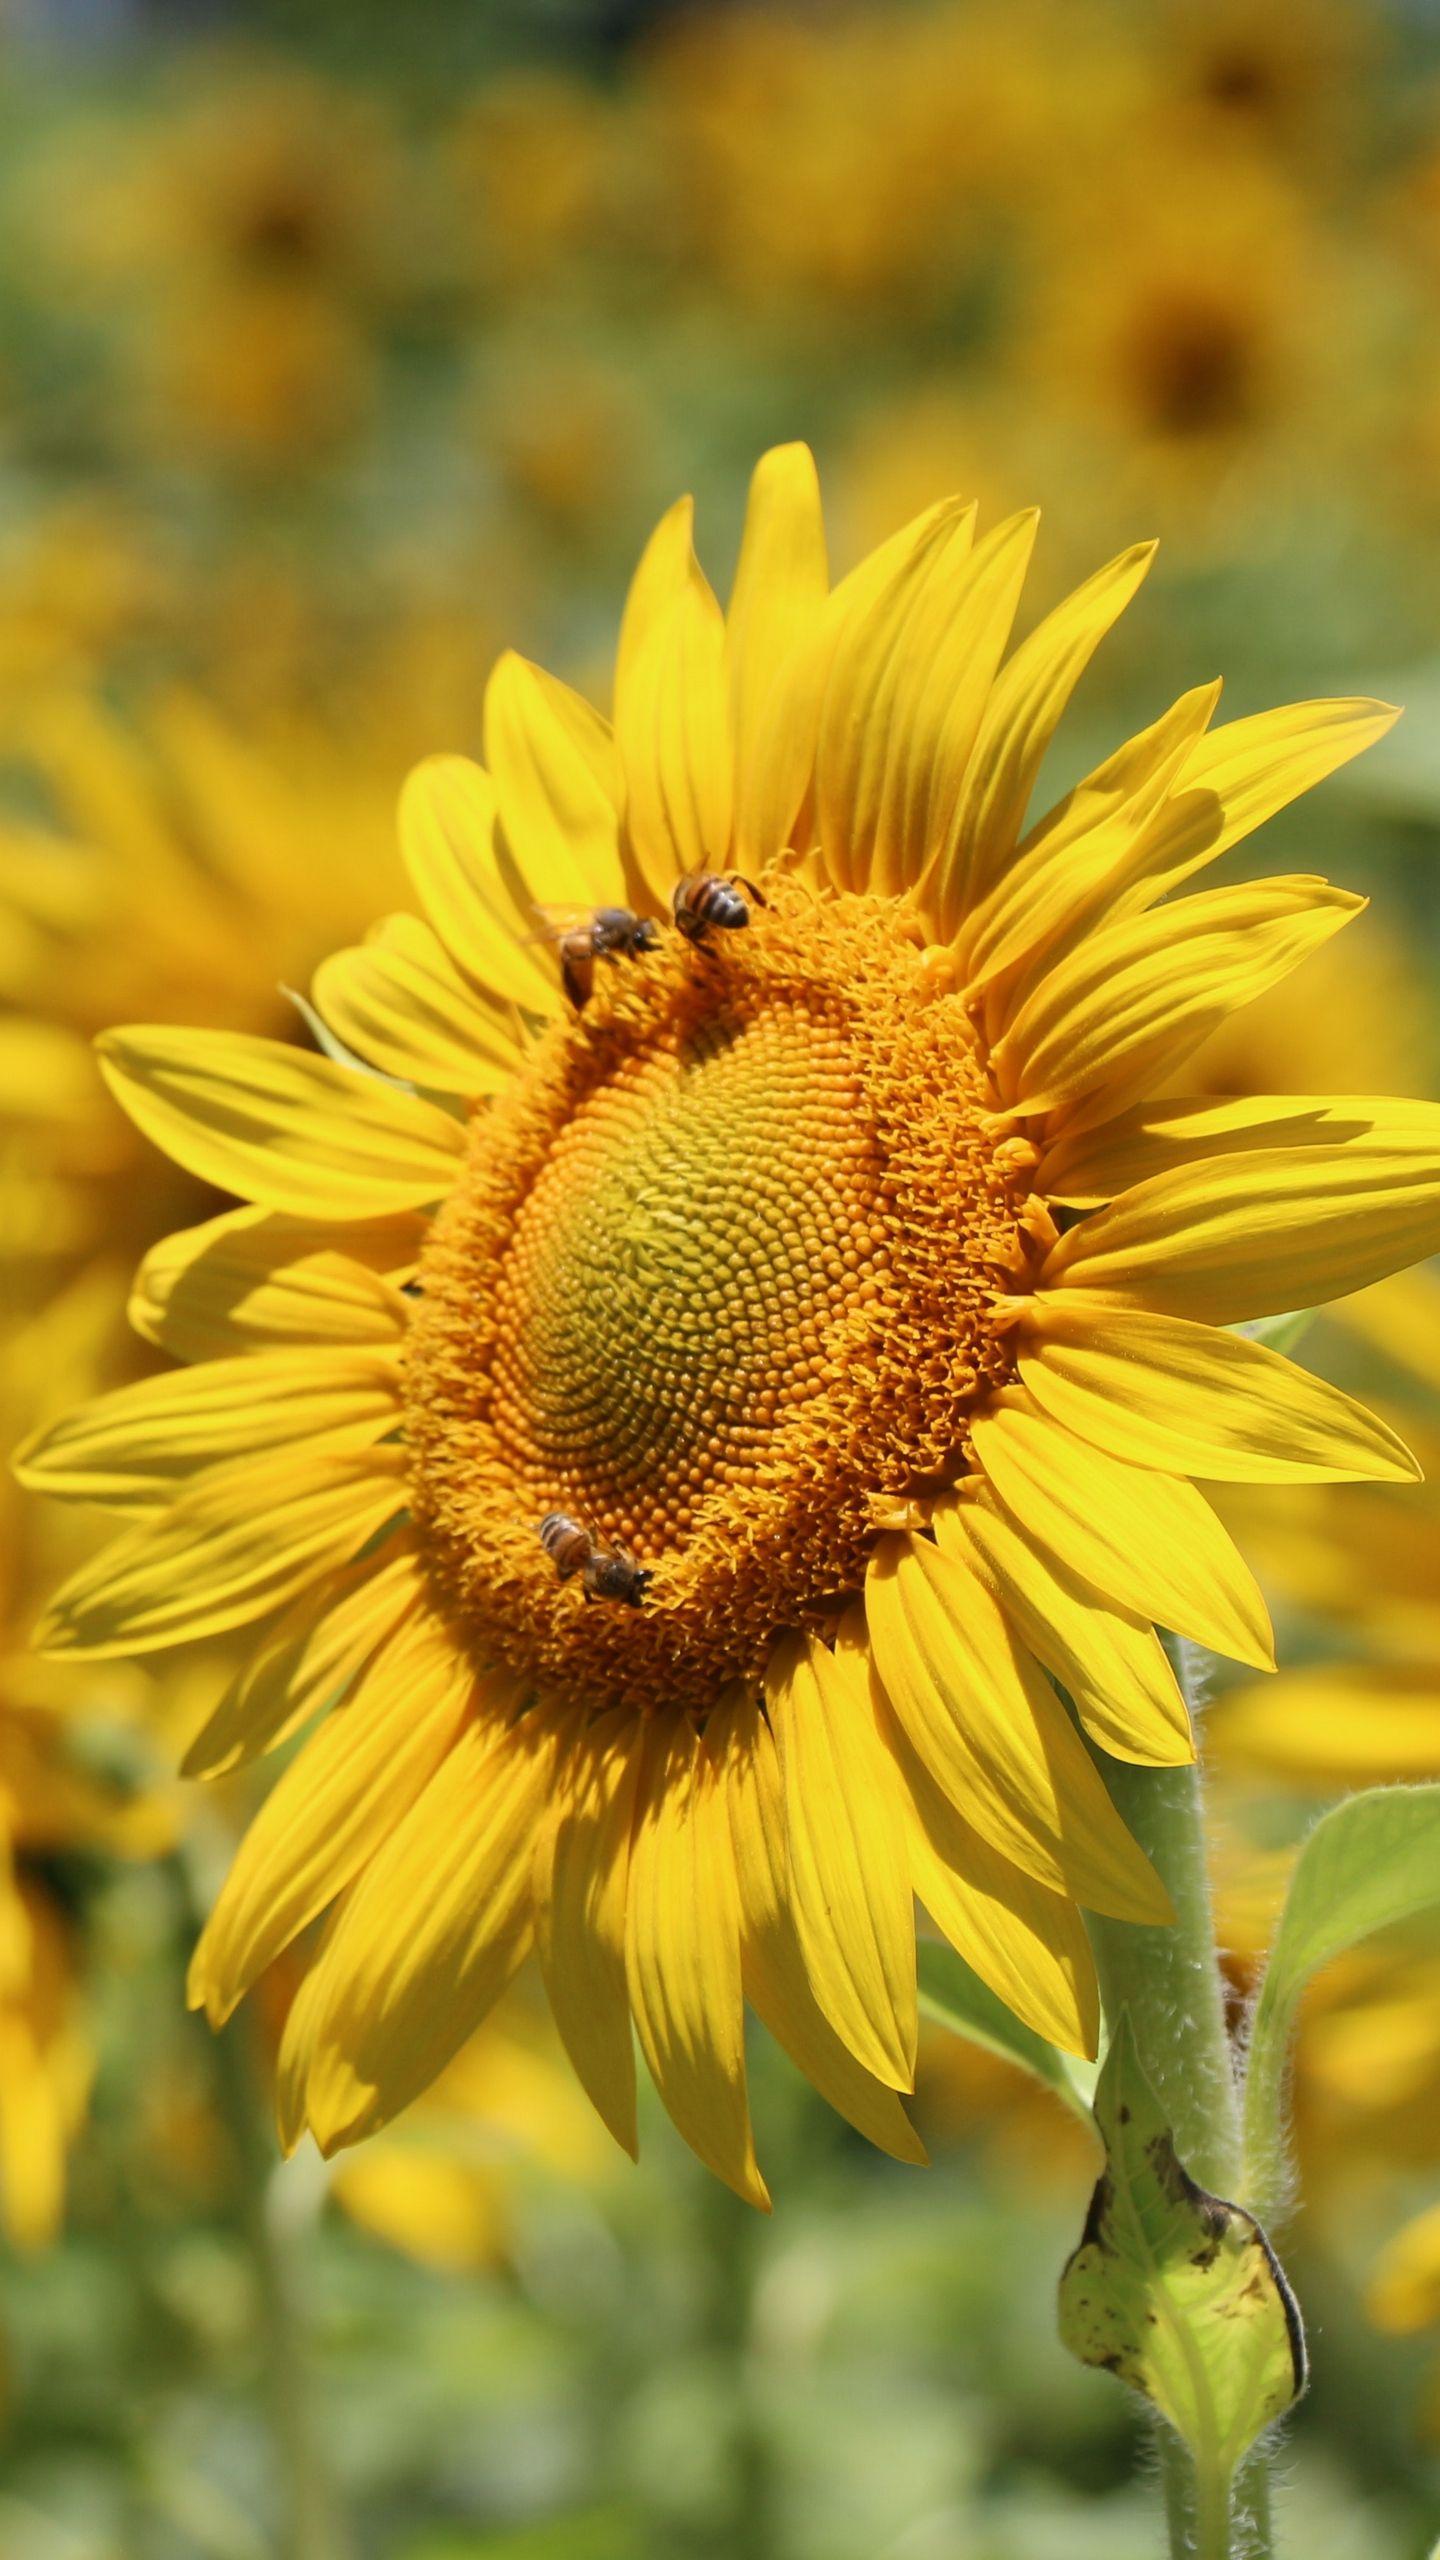 Download wallpaper 1440x2560 sunflower, bees, pollination, yellow